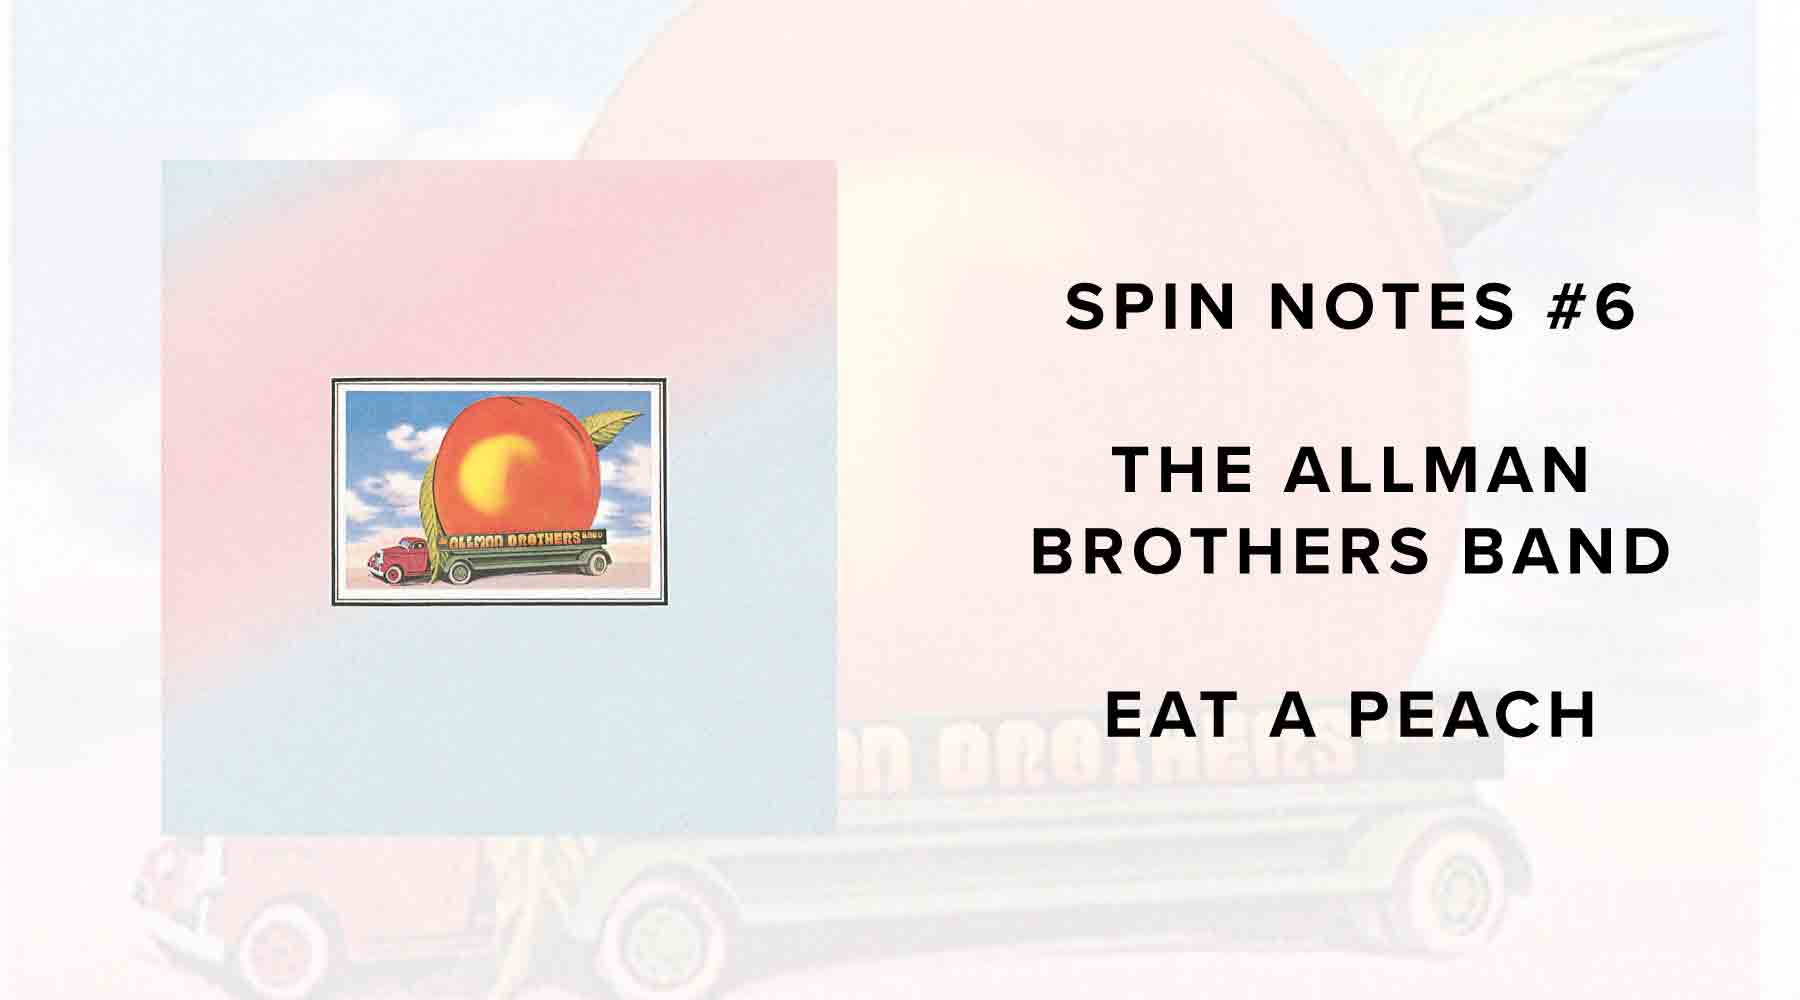 Spin Notes #6 - The Allman Brothers Band - Eat a Peach